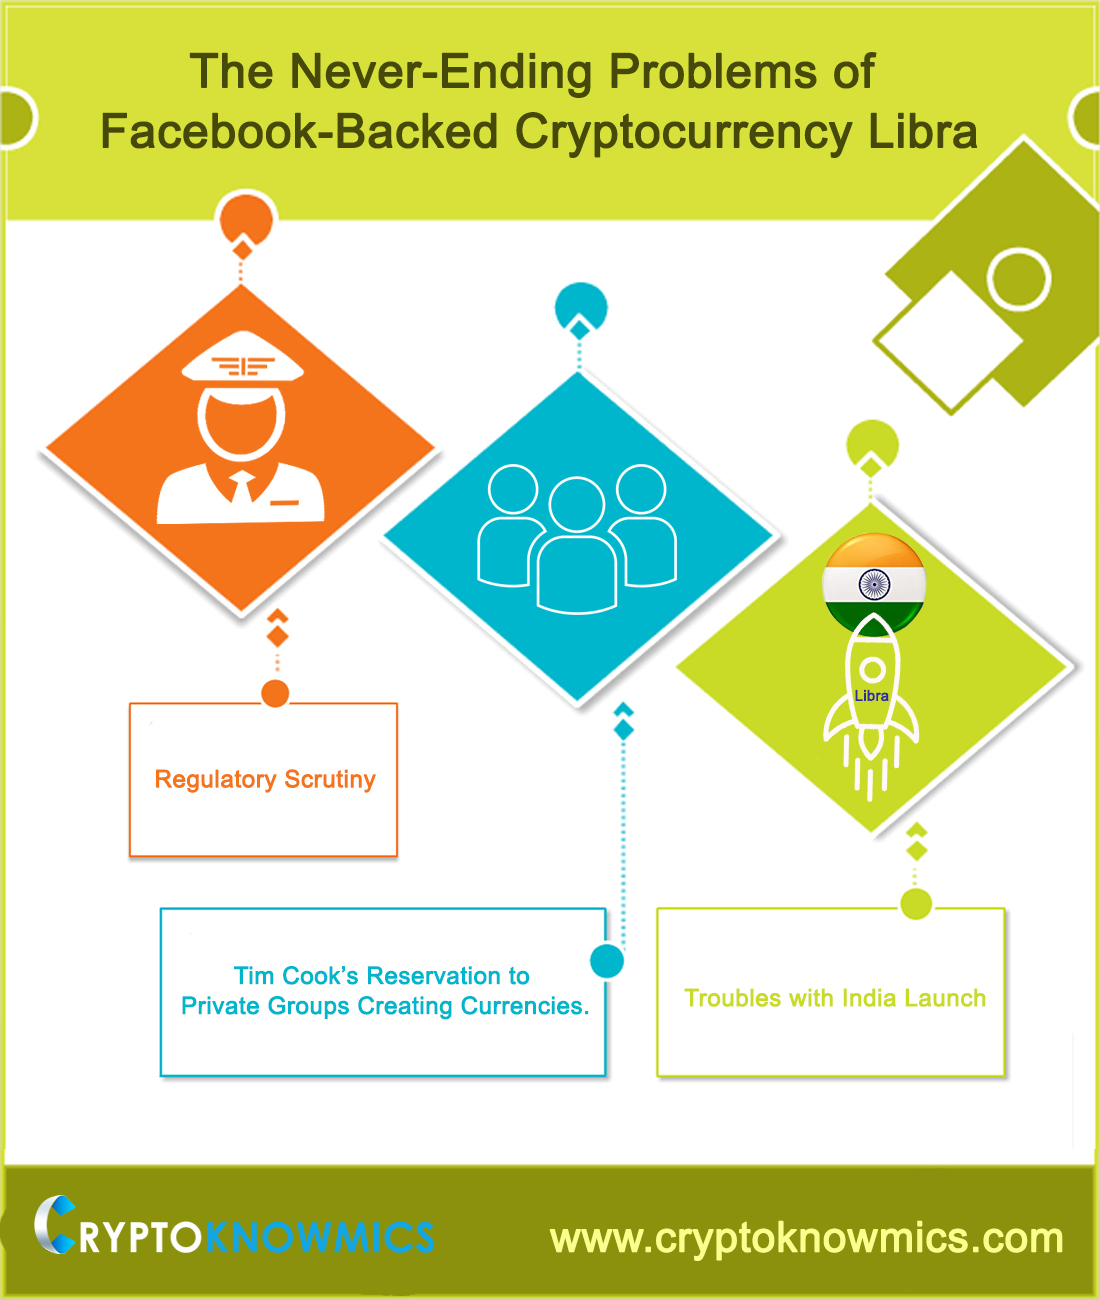 Facebook-Backed Cryptocurrency Libra